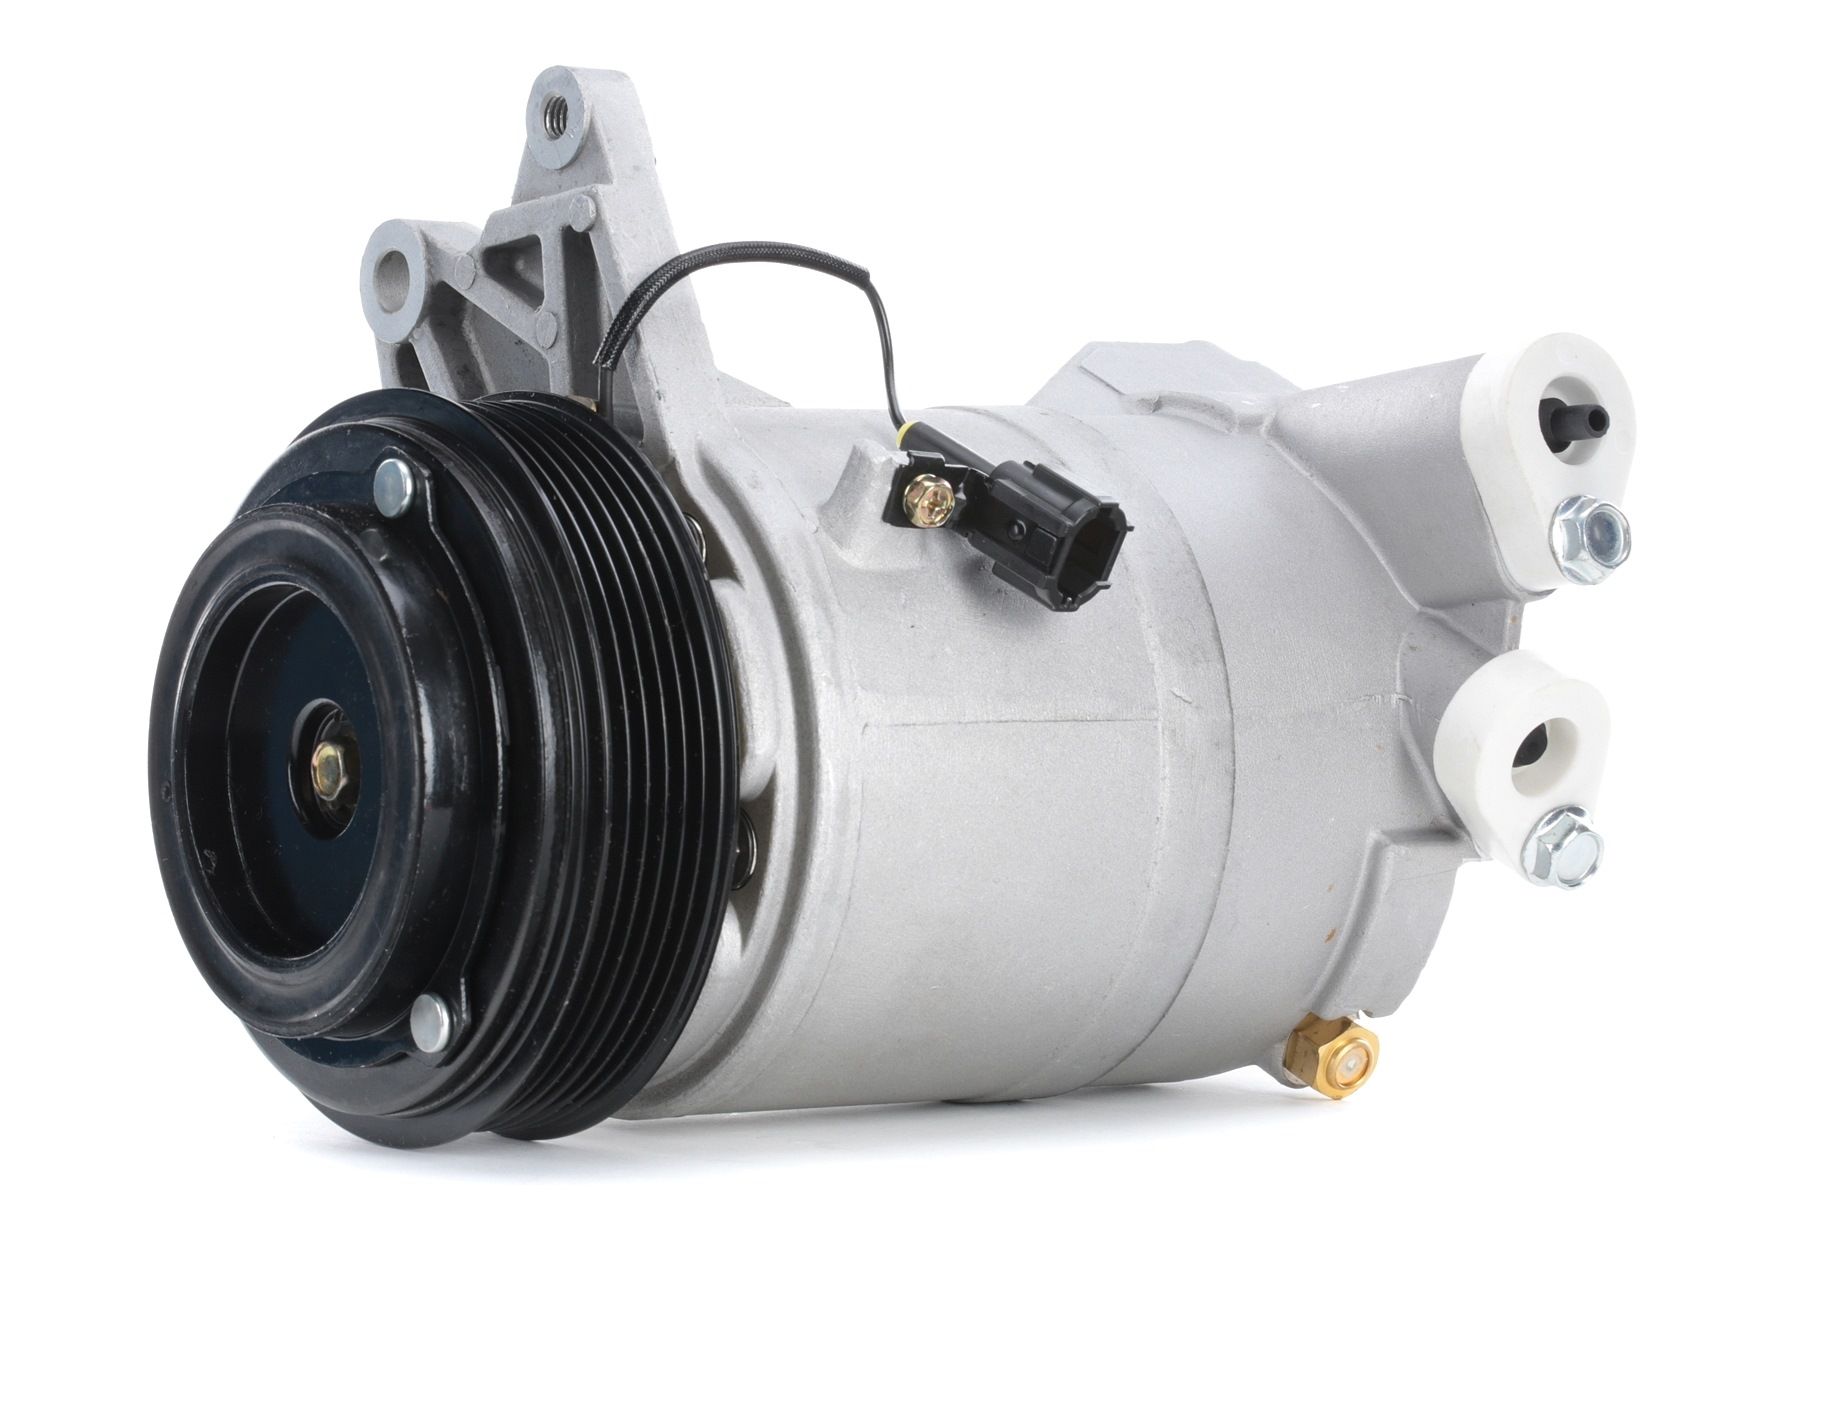 STARK SKKM-0340291 Air conditioning compressor DKS17DS, PAG 46, R 134a, with PAG compressor oil